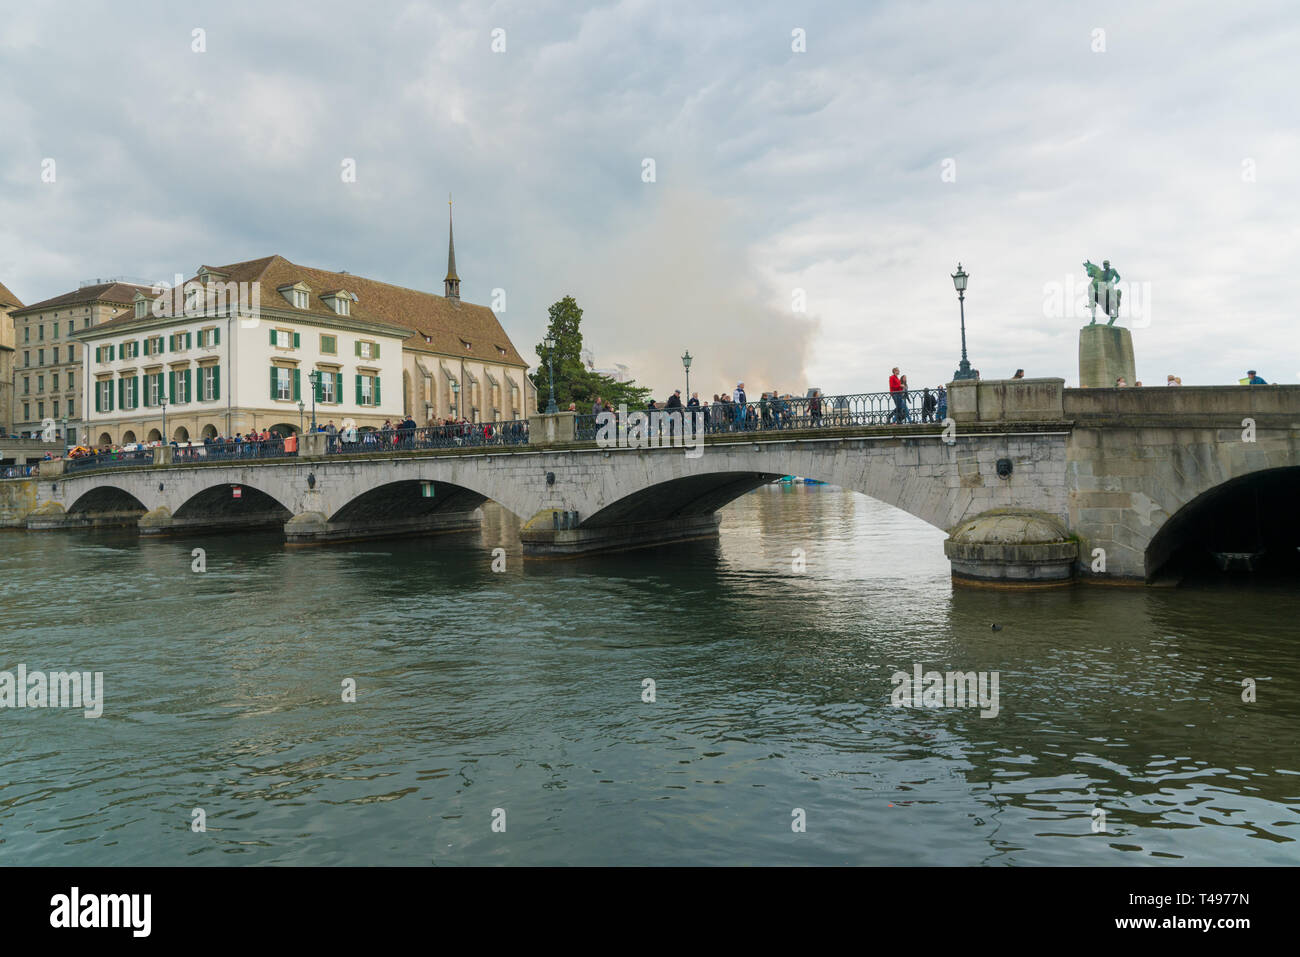 Zurich, ZH / Switzerland - April 8, 2019: Zurich cityscape with many people leaving at the end of the traditional spring festival of Sechselauten in A Stock Photo